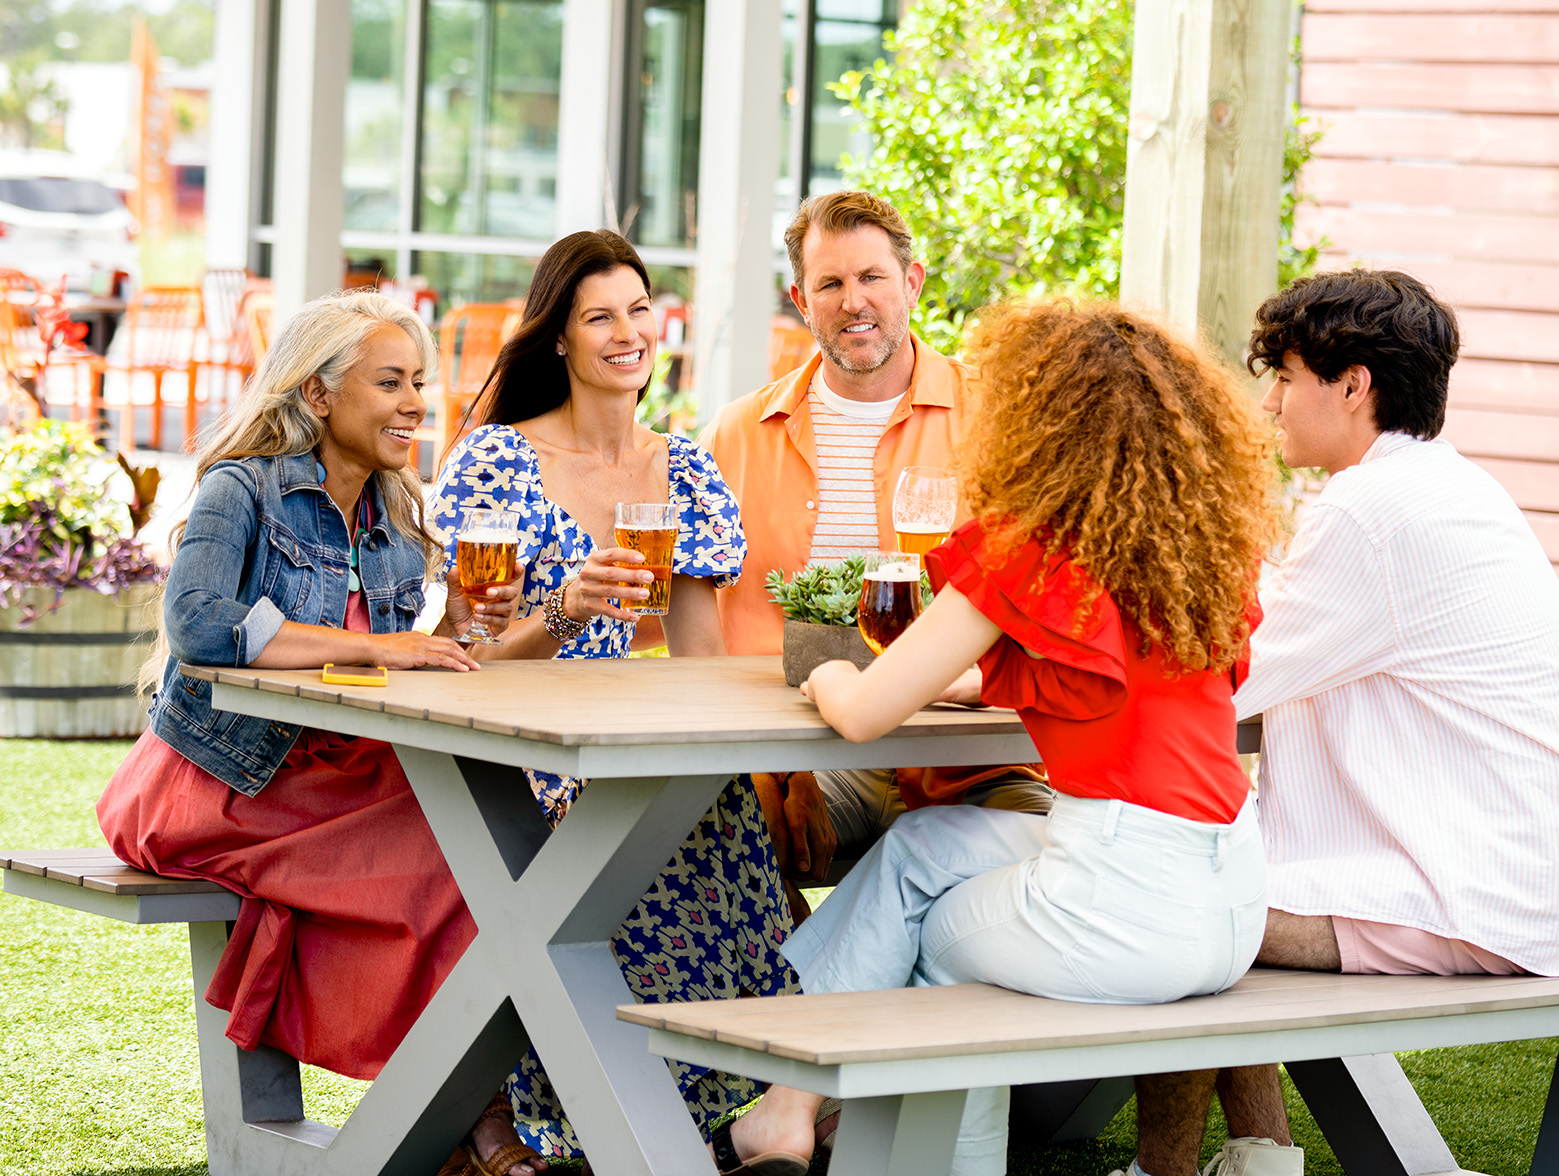 Five people gather at a table and enjoy beers